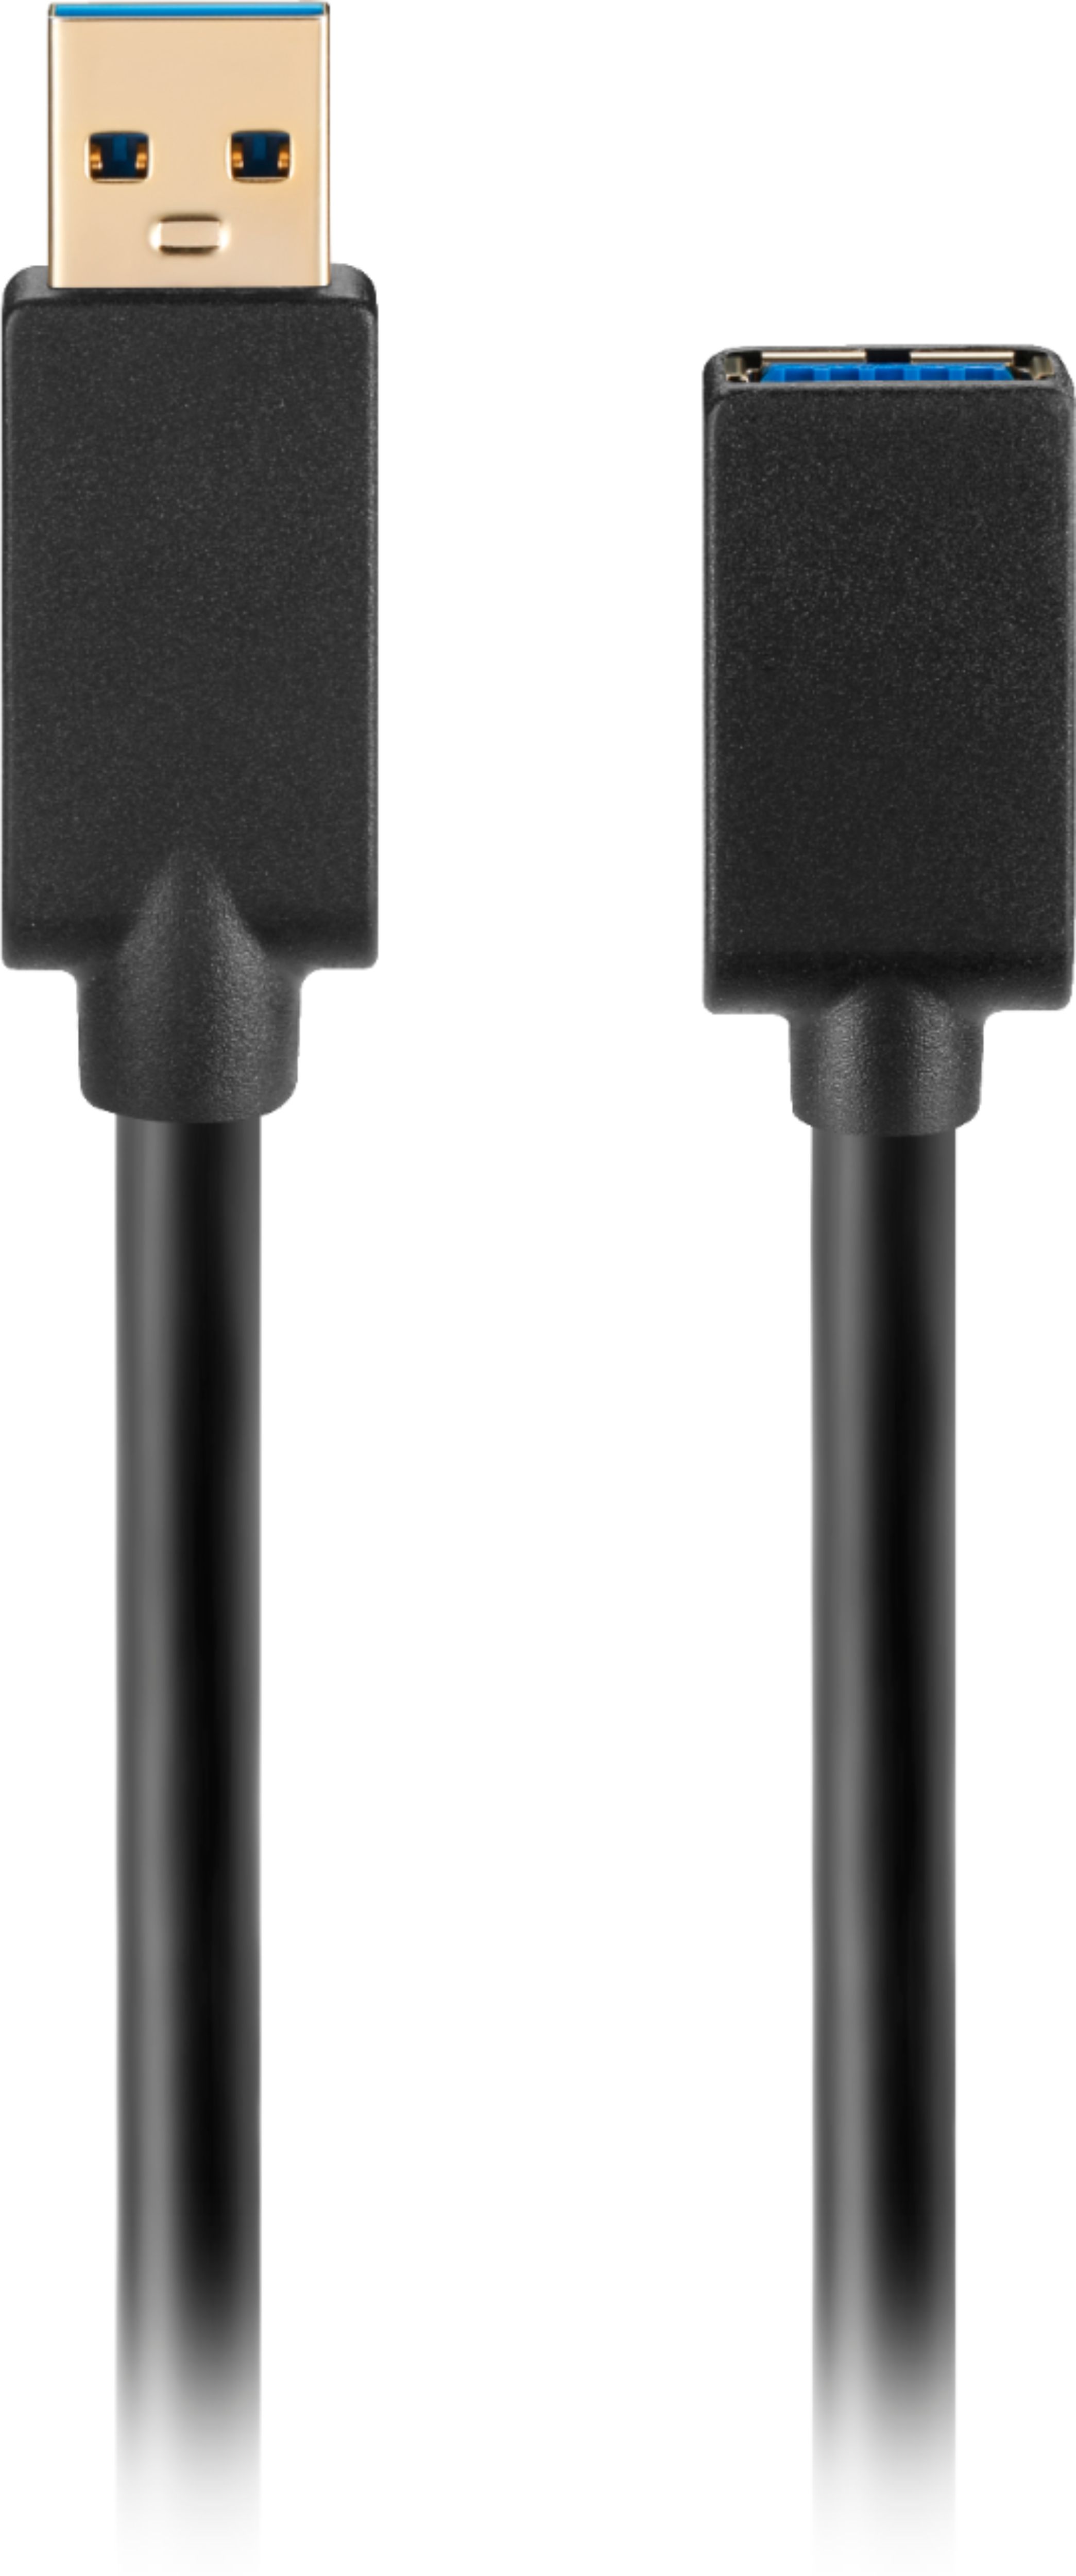 Angle View: Best Buy essentials™ - 10' USB-A 3.0 Male to Female Extension Cable - Black